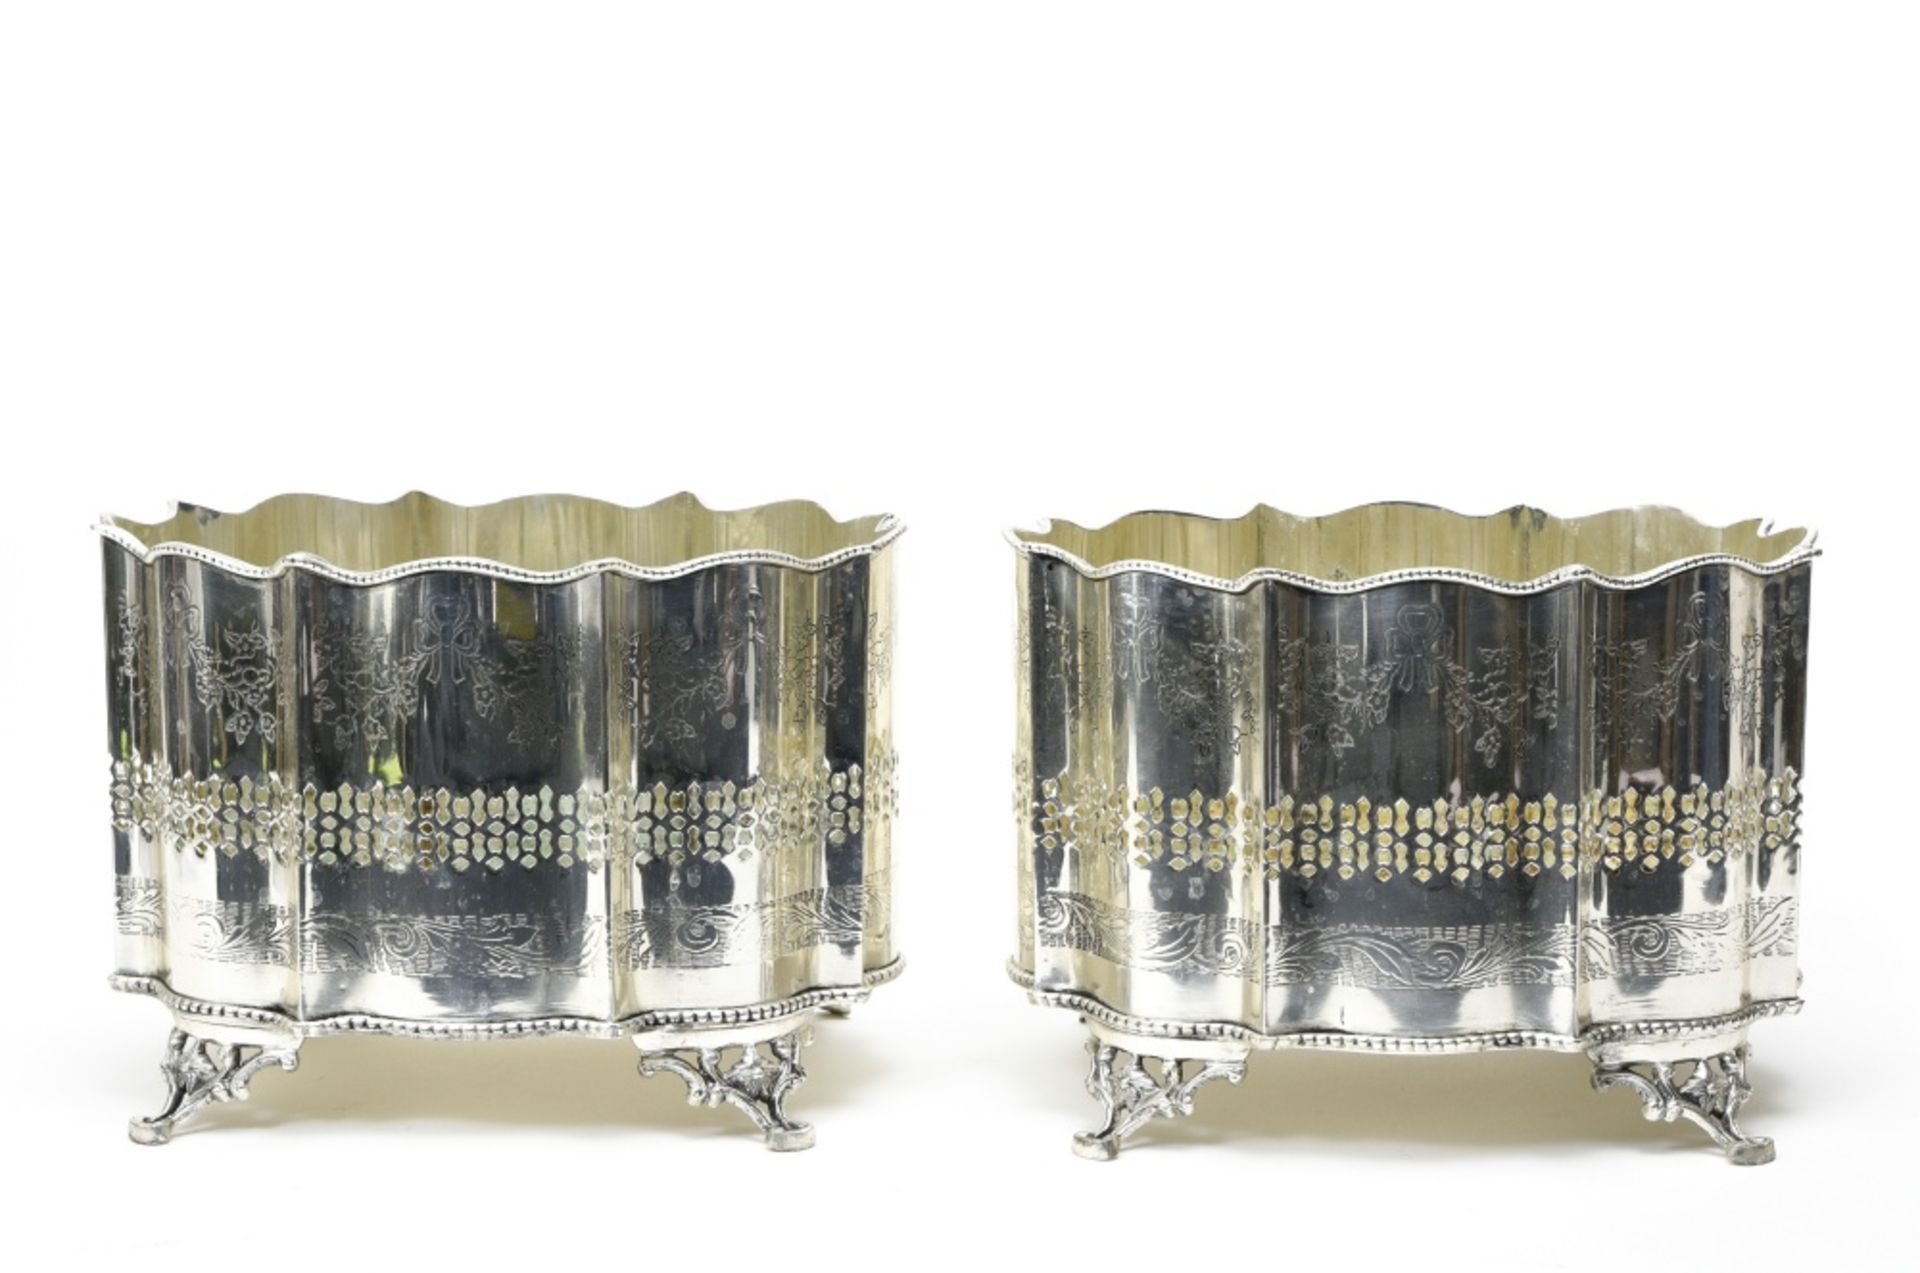 English work Pair of planters, Silvery metal with floral dŽcor. Height (cm) : 19 - Width (cm) : - Image 2 of 2